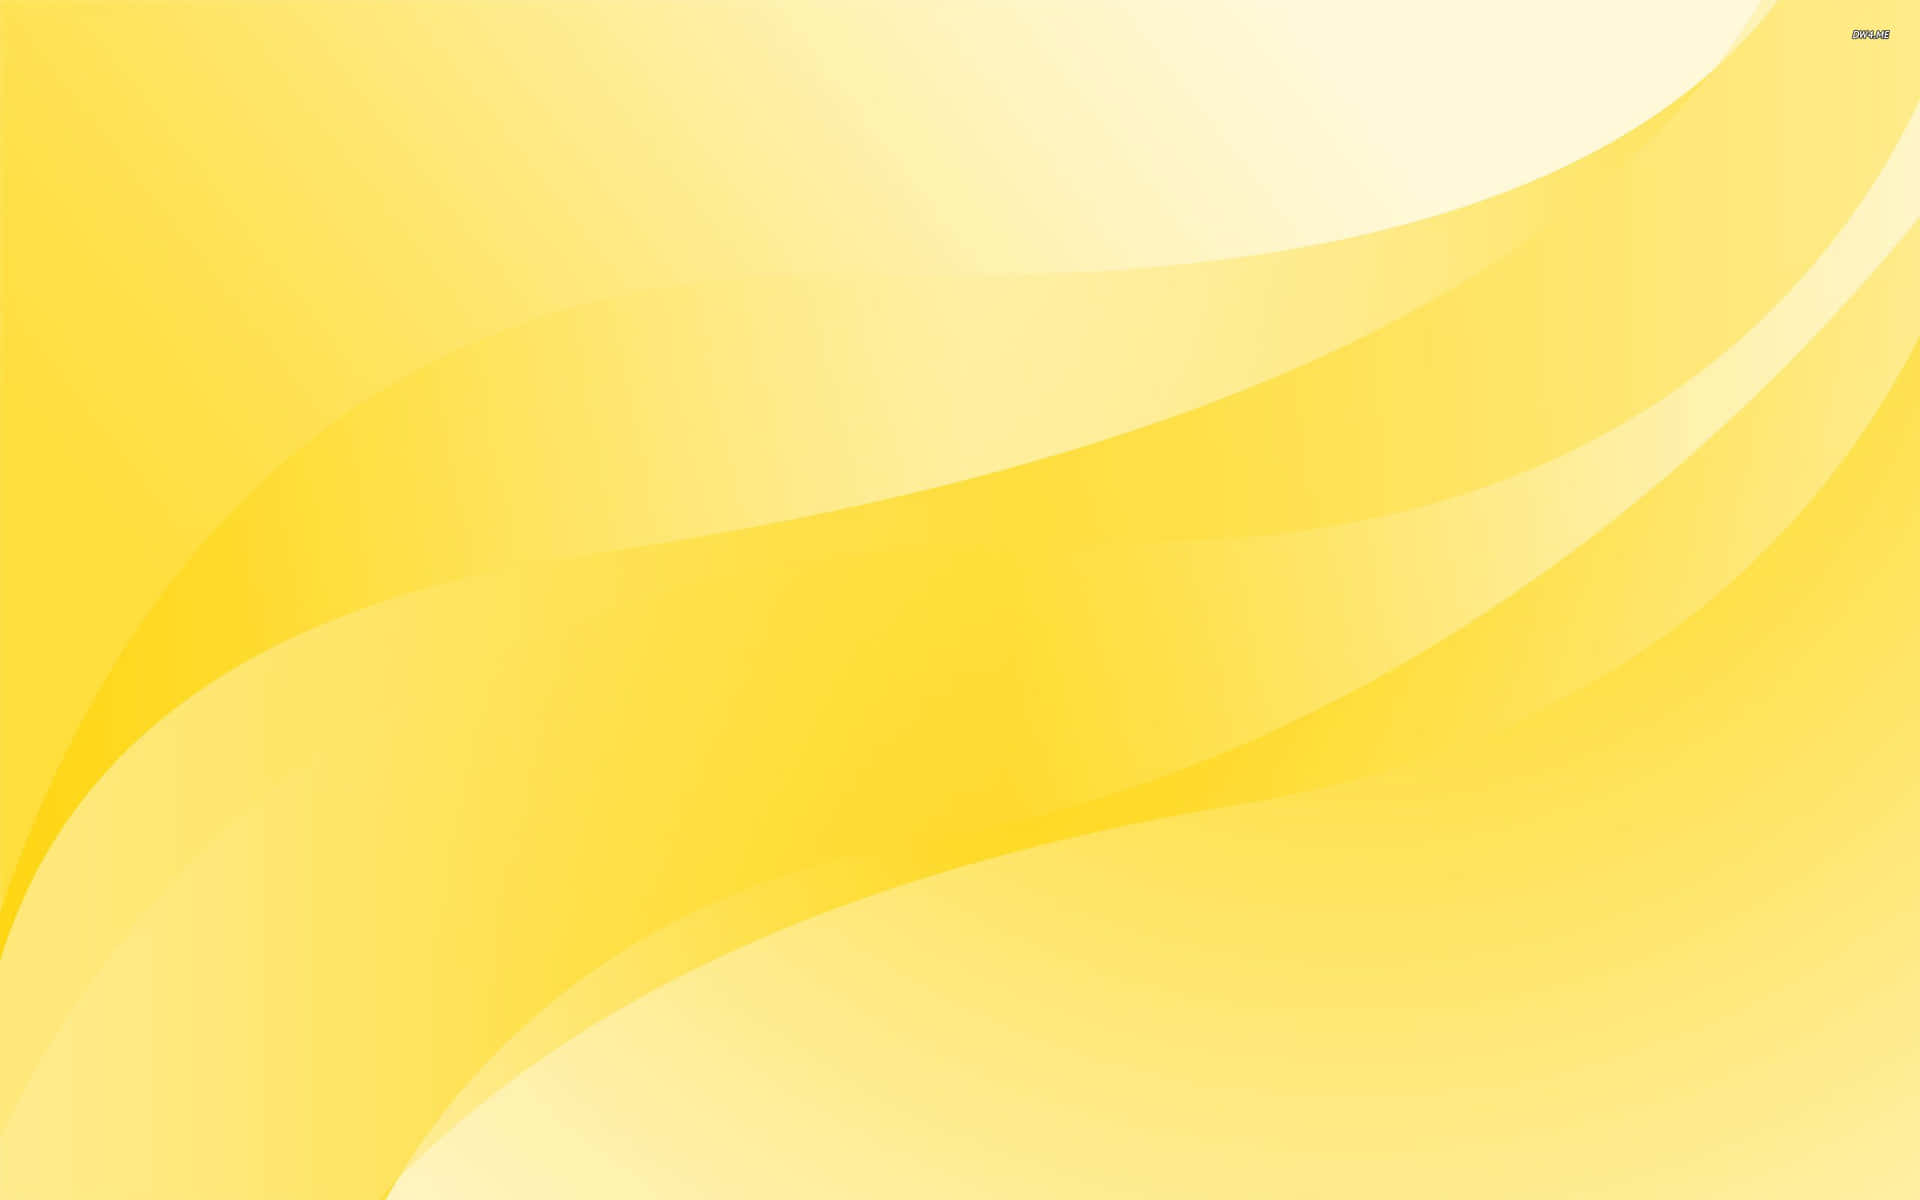 A Yellow Background With A Wavy Shape